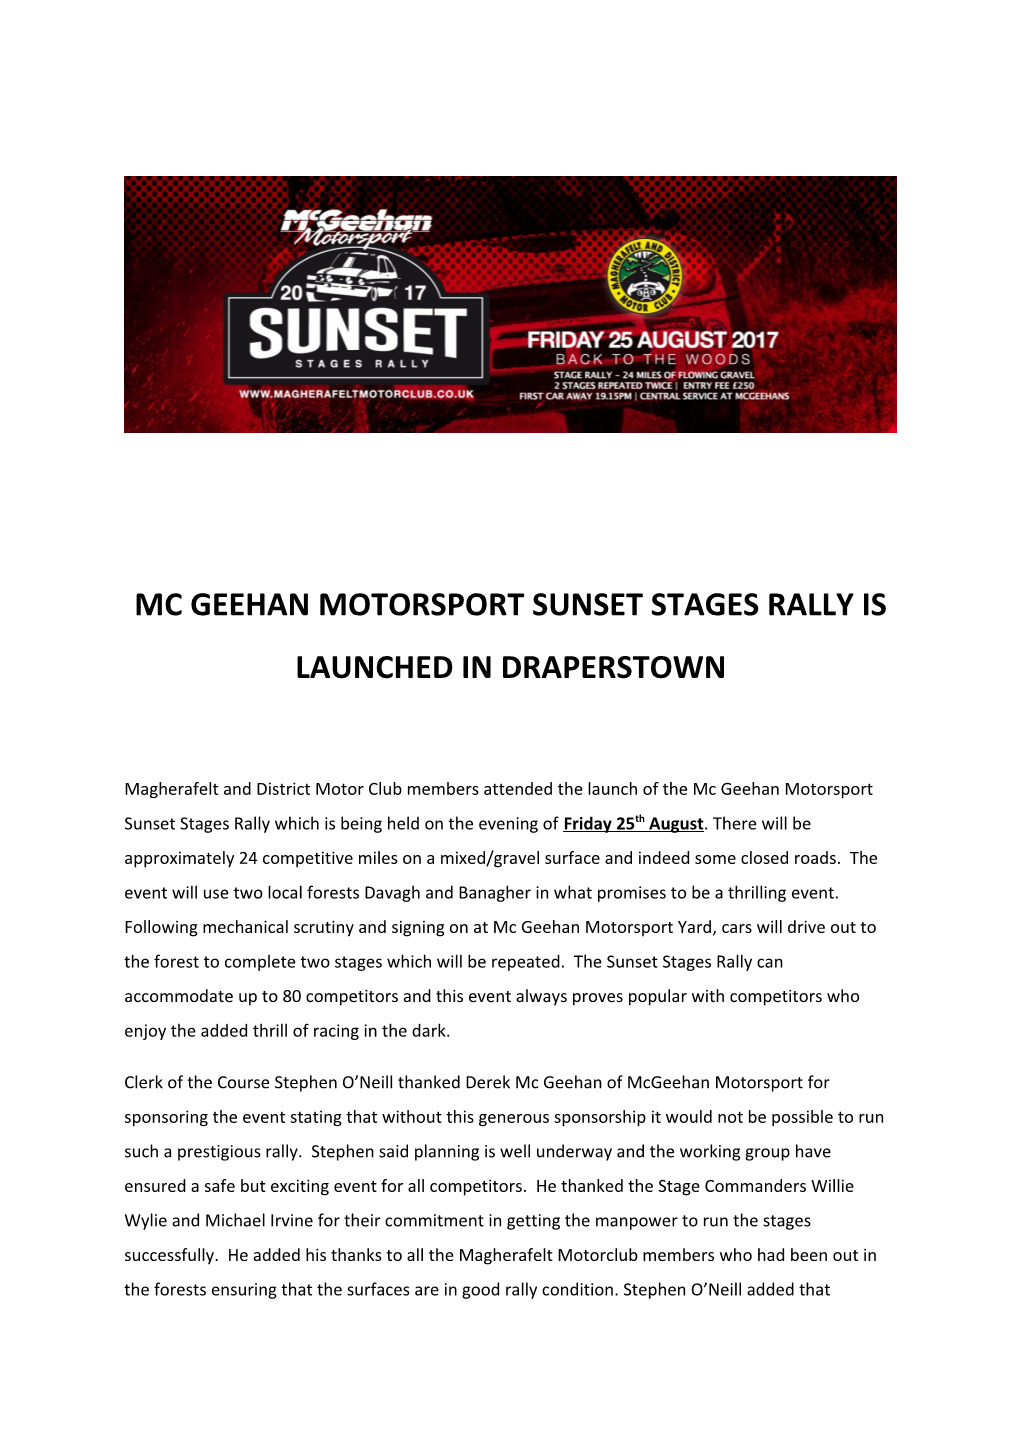 Mc Geehan Motorsport Sunset Stages Rally Is Launched in Draperstown